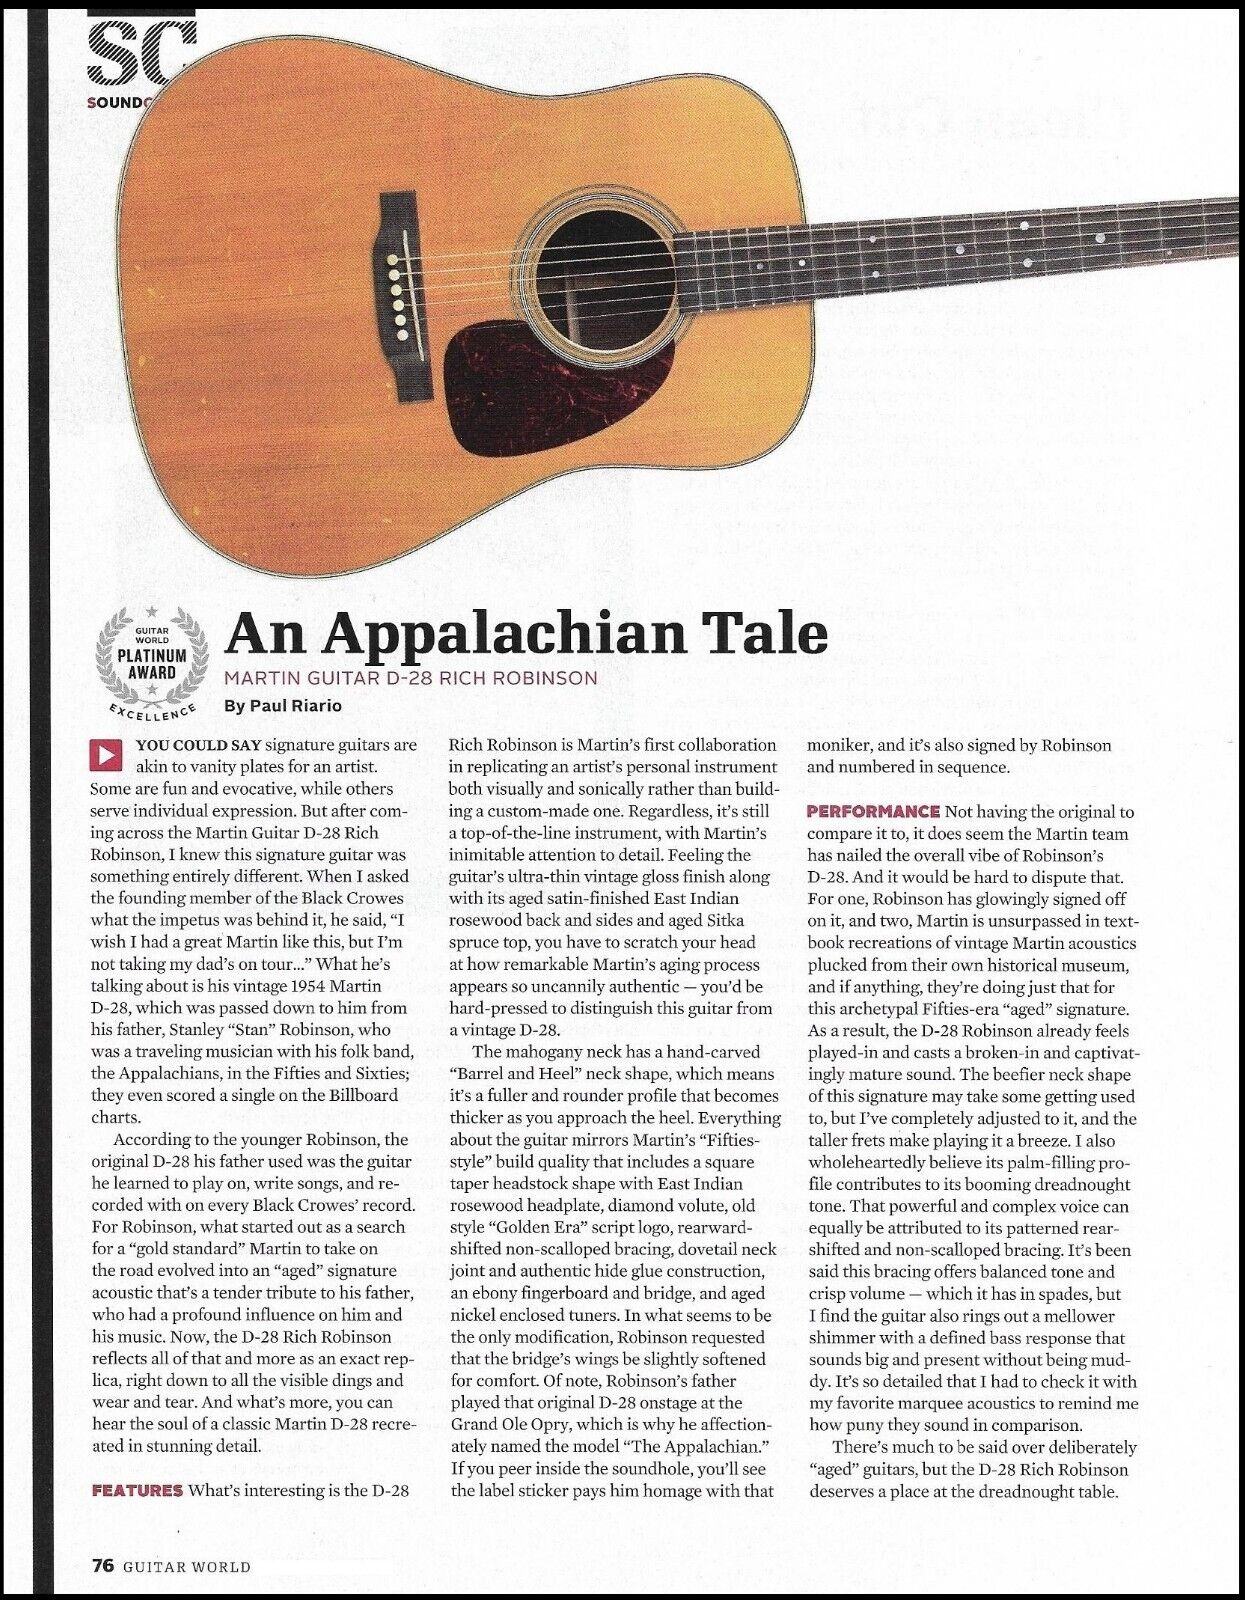 Martin HD-28 Rich Robinson acoustic guitar sound check review 2-page article